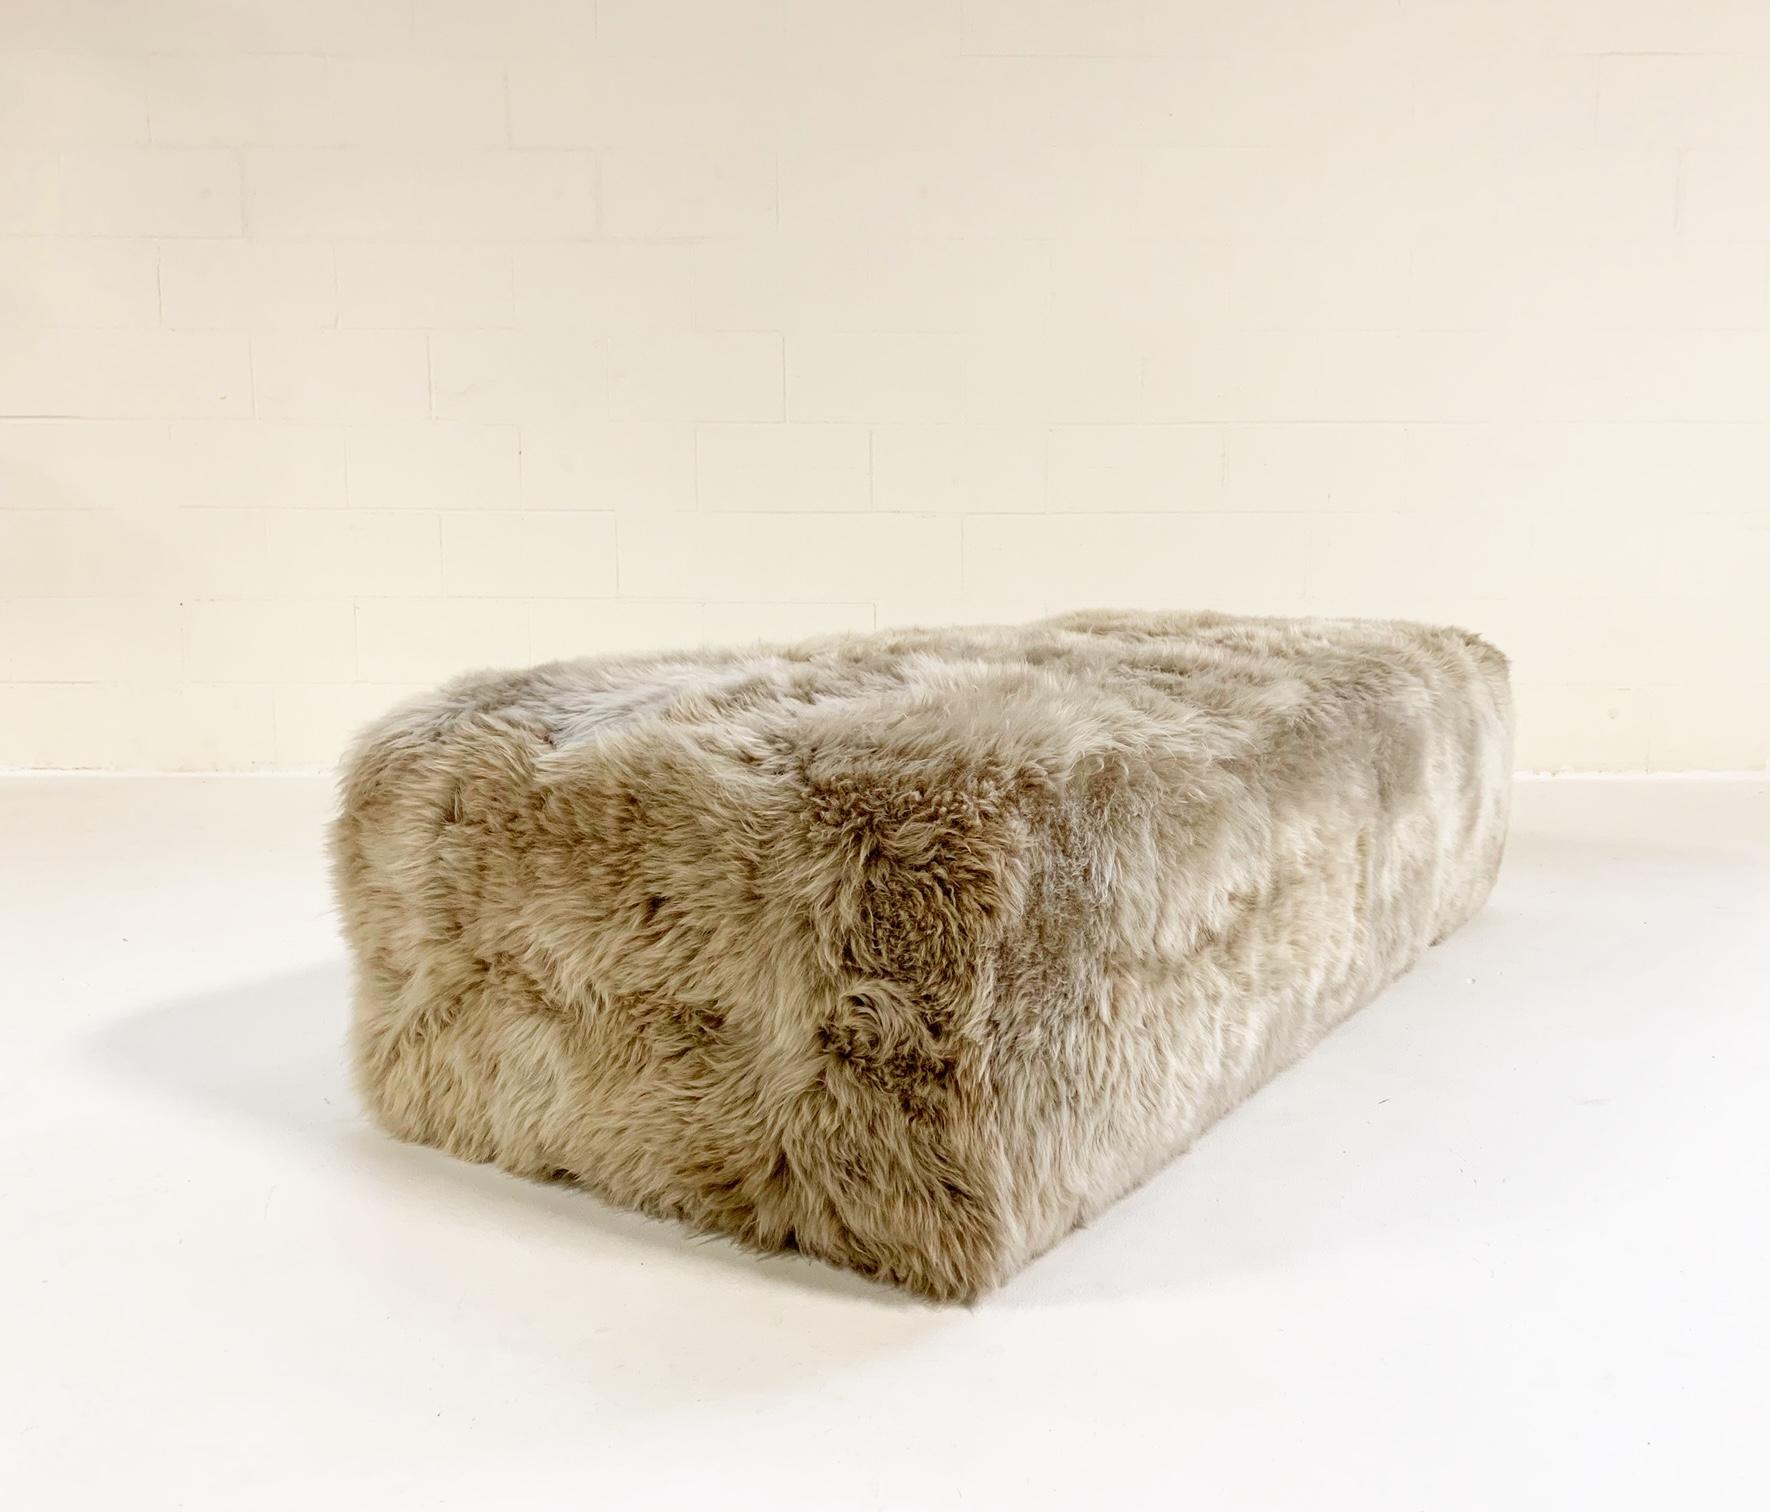 Part of the Forsyth signature collection. This is a versatile piece for any room adding natural texture and pattern. The perfect coffee table, ottoman, bench at the end of a bed, or extra seating.

Custom made to order. Please allow 10 to 12 weeks.